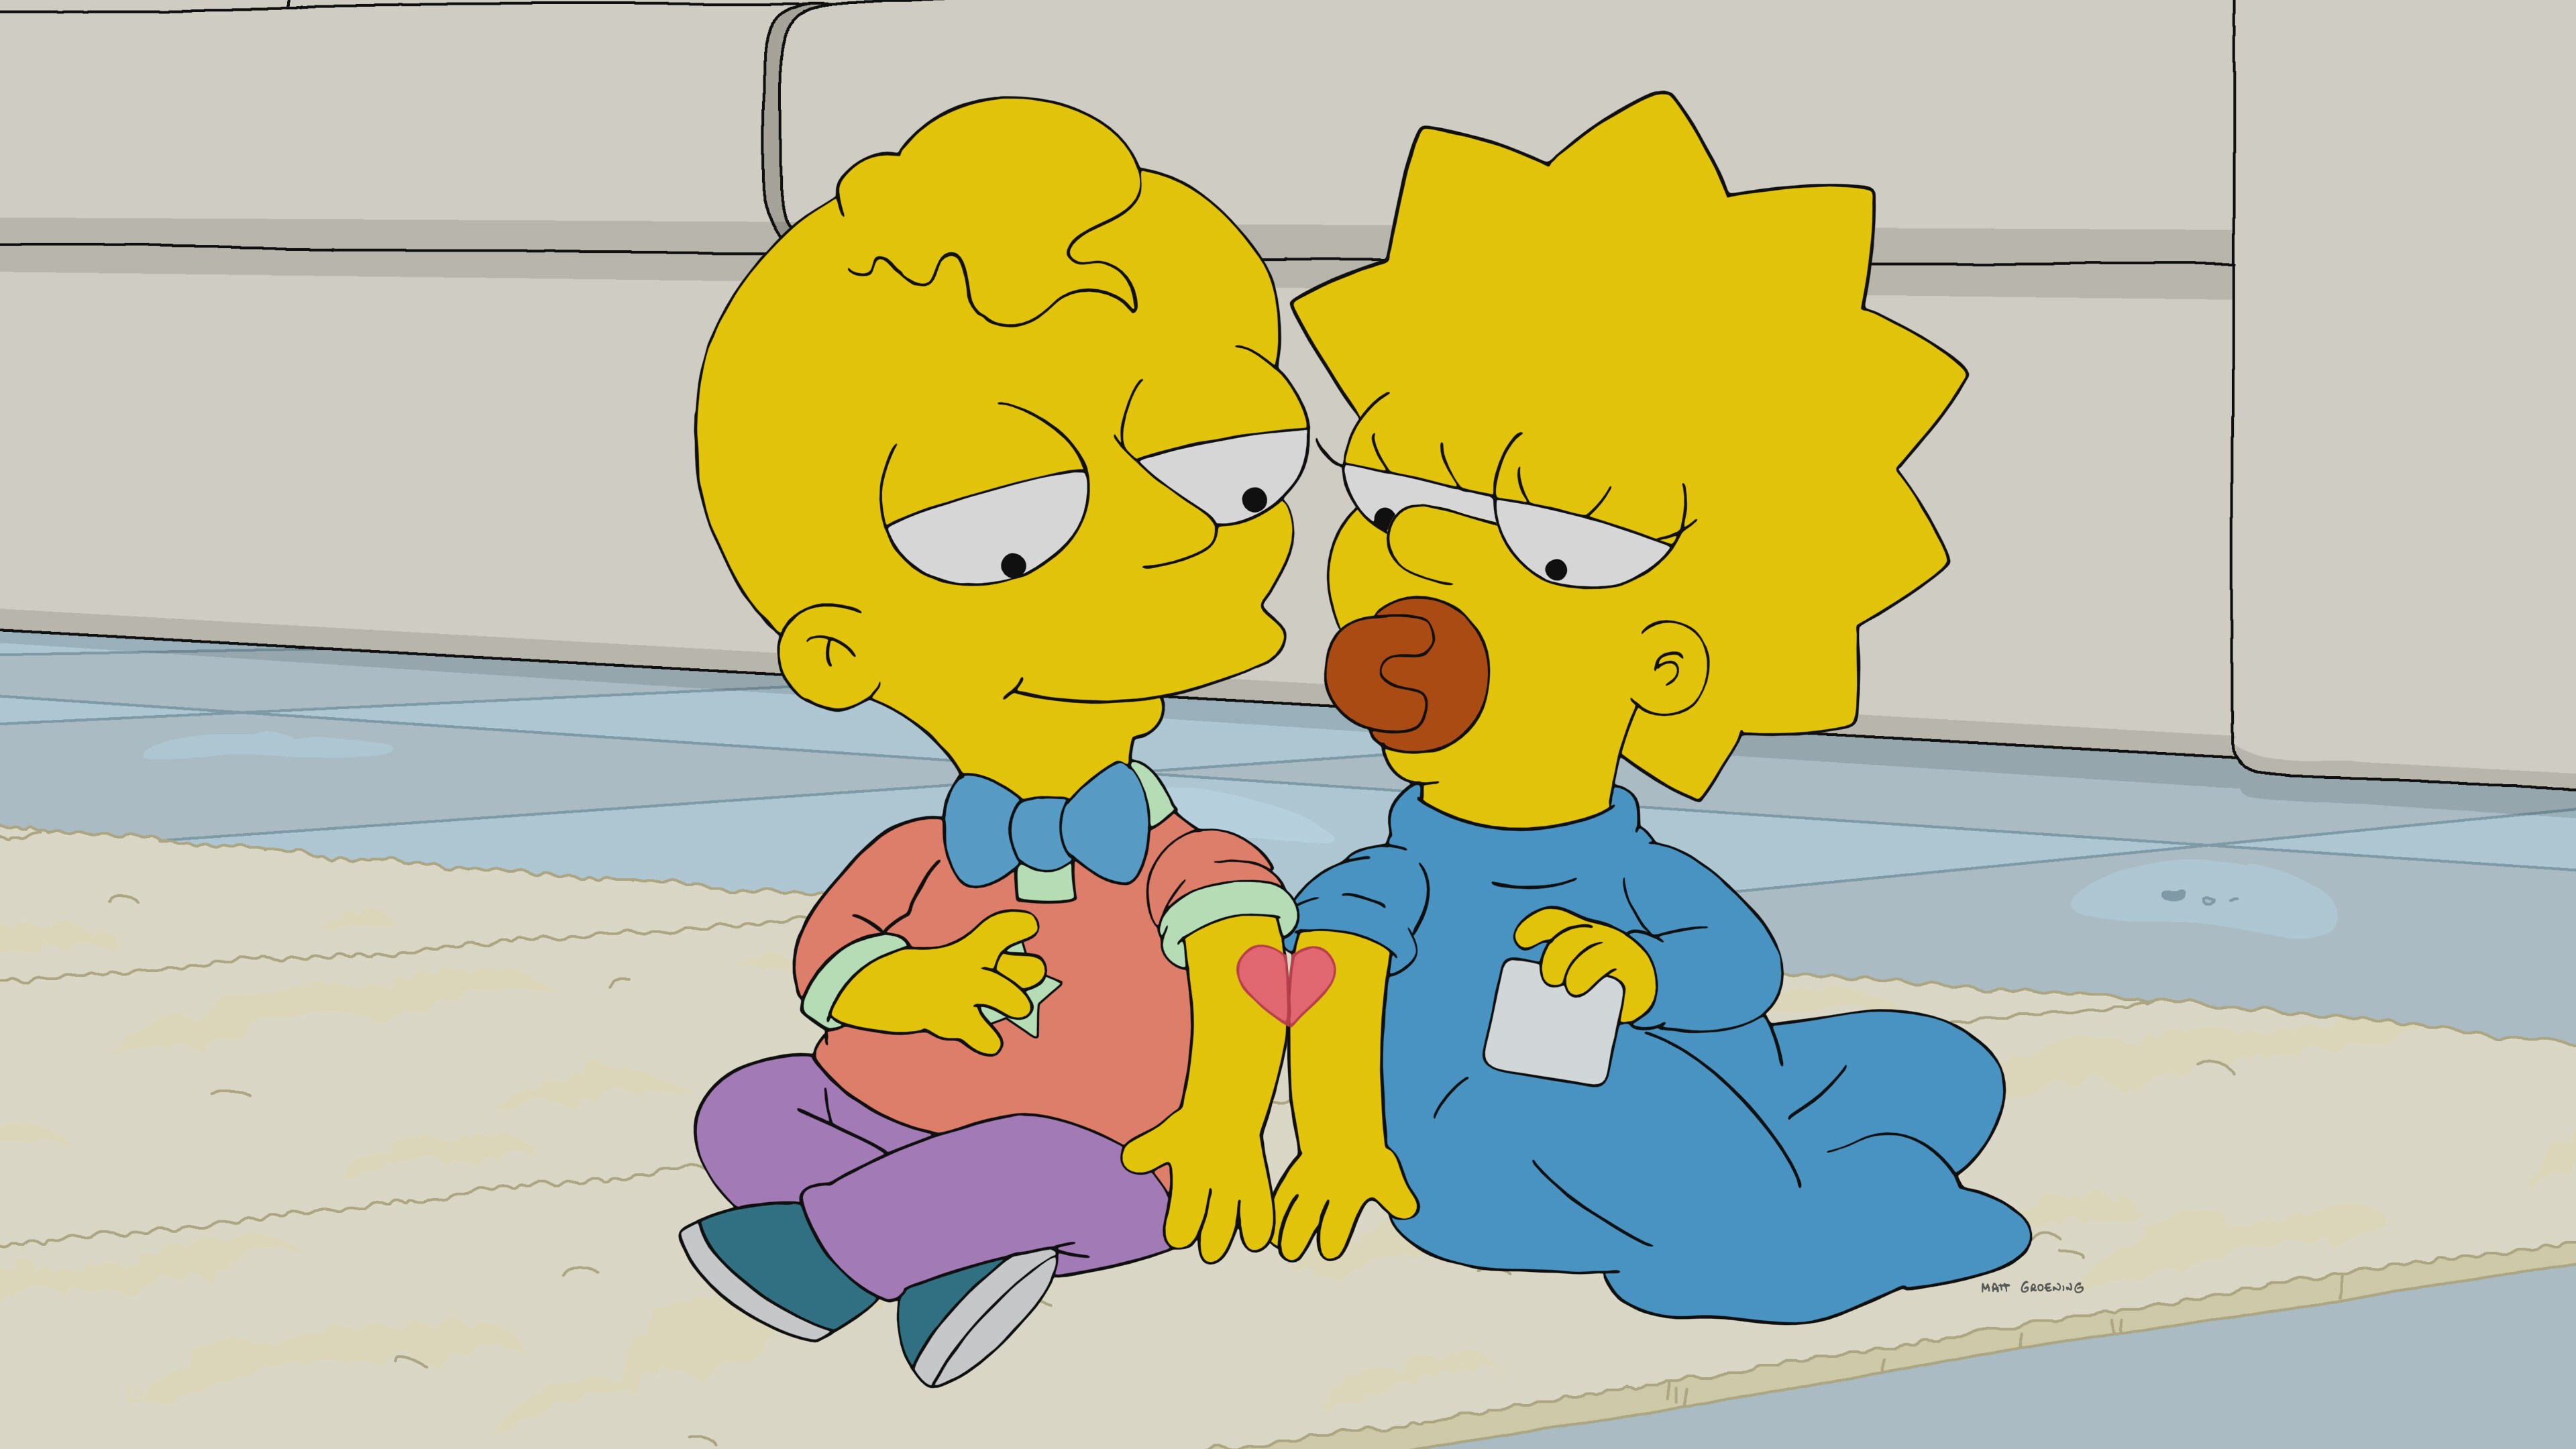 THE SIMPSONS: Marge won't let Maggie play with her new baby crush because of his annoying mother, leading Maggie into a depressive spiral. Meanwhile, Mr. Burns tasks Homer with swindling Cletus out of his helium fortune in the “The Incredible Lightness of Being a Baby” episode of THE SIMPSONS.